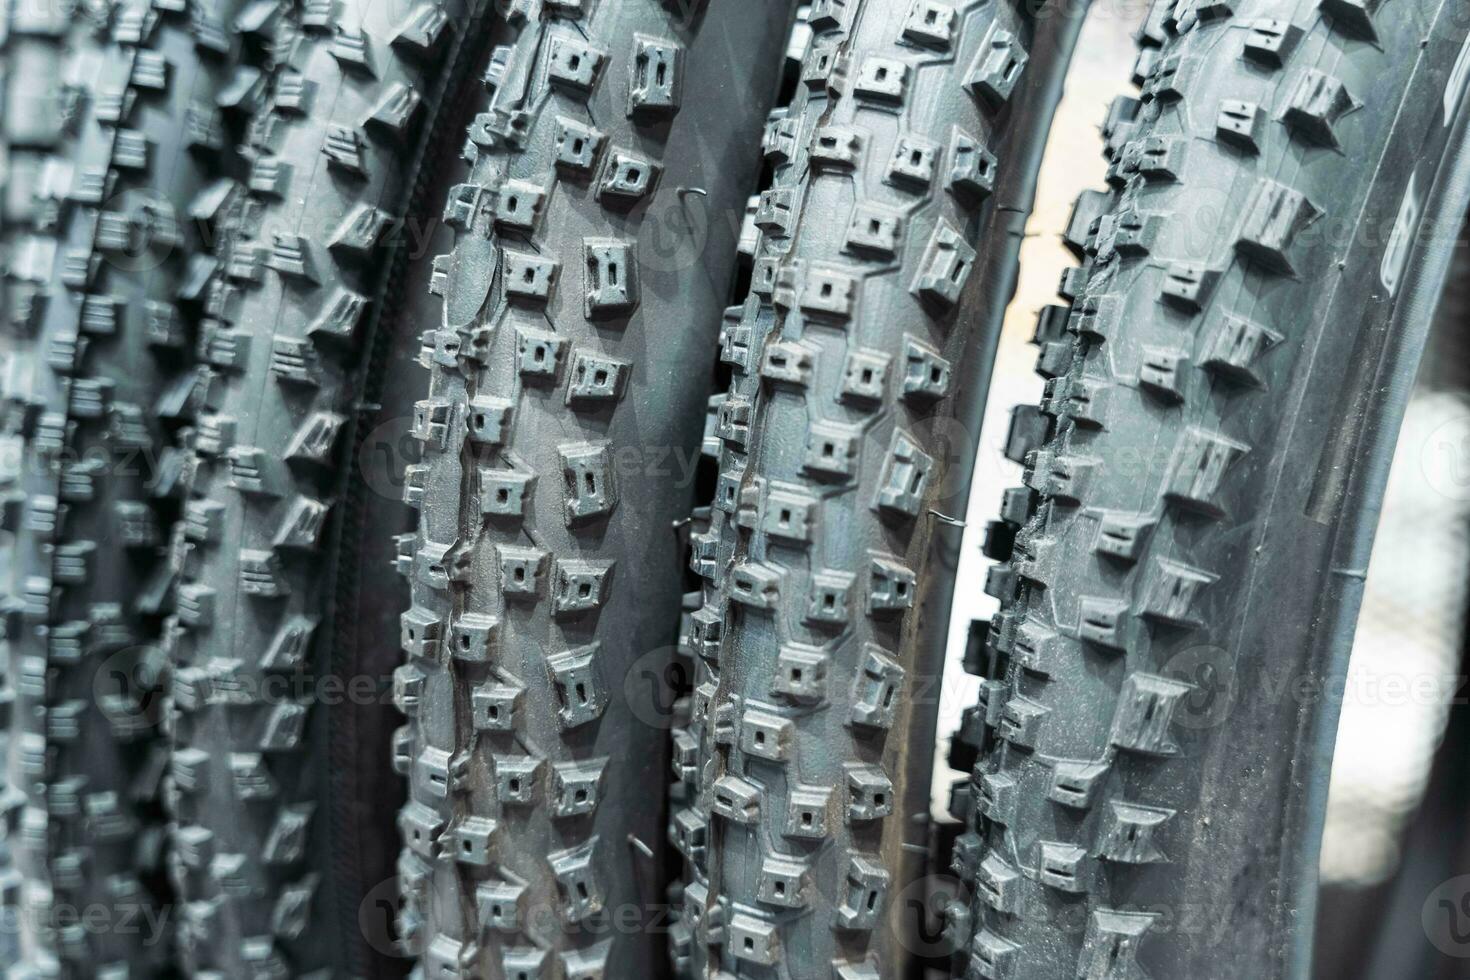 number of new bicycle tires for a mountain bike on a shelf in a sports store photo